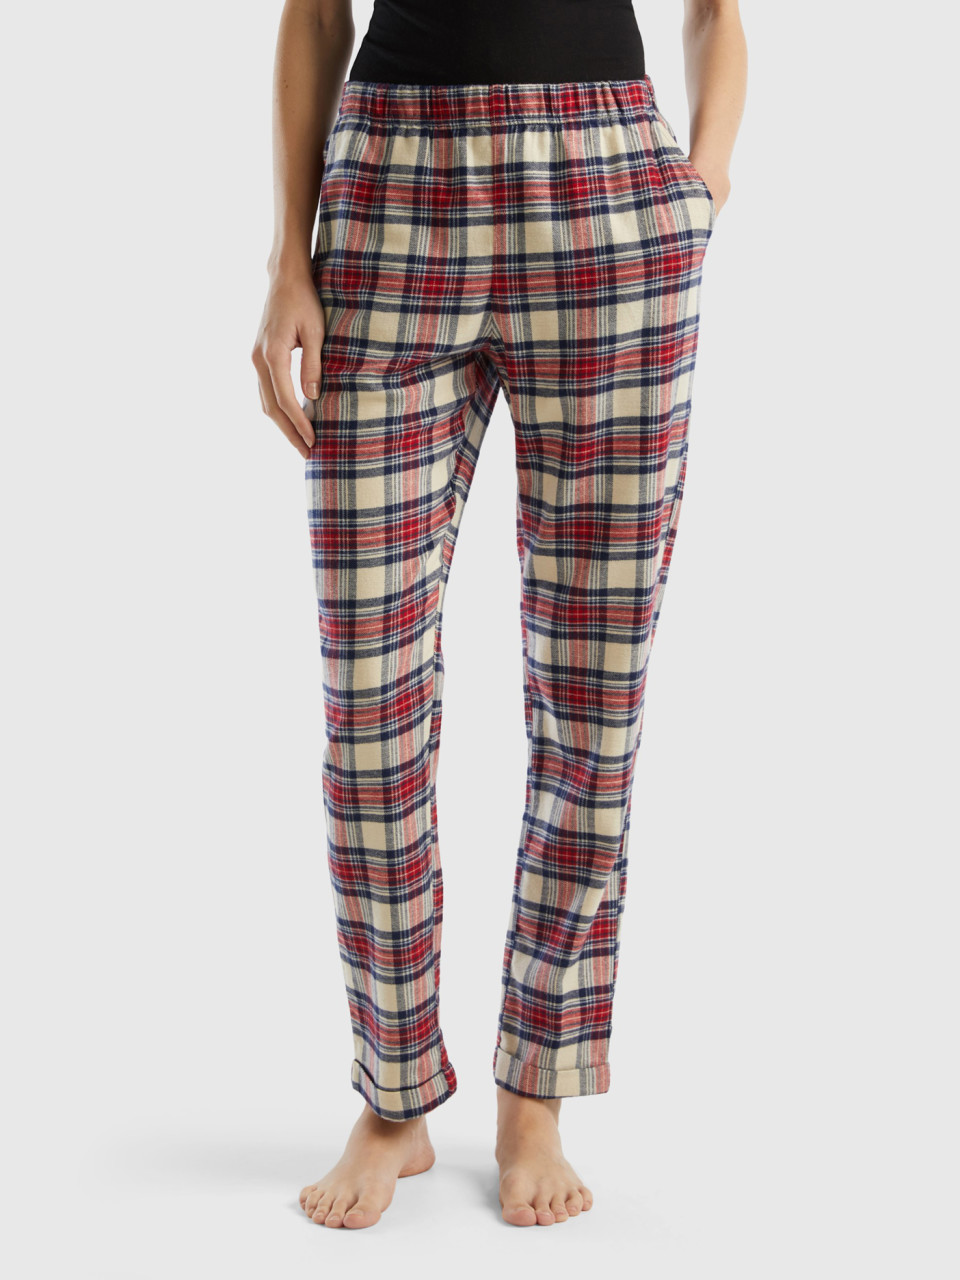 Benetton, Red And Blue Tartan Trousers, Multi-color, Women